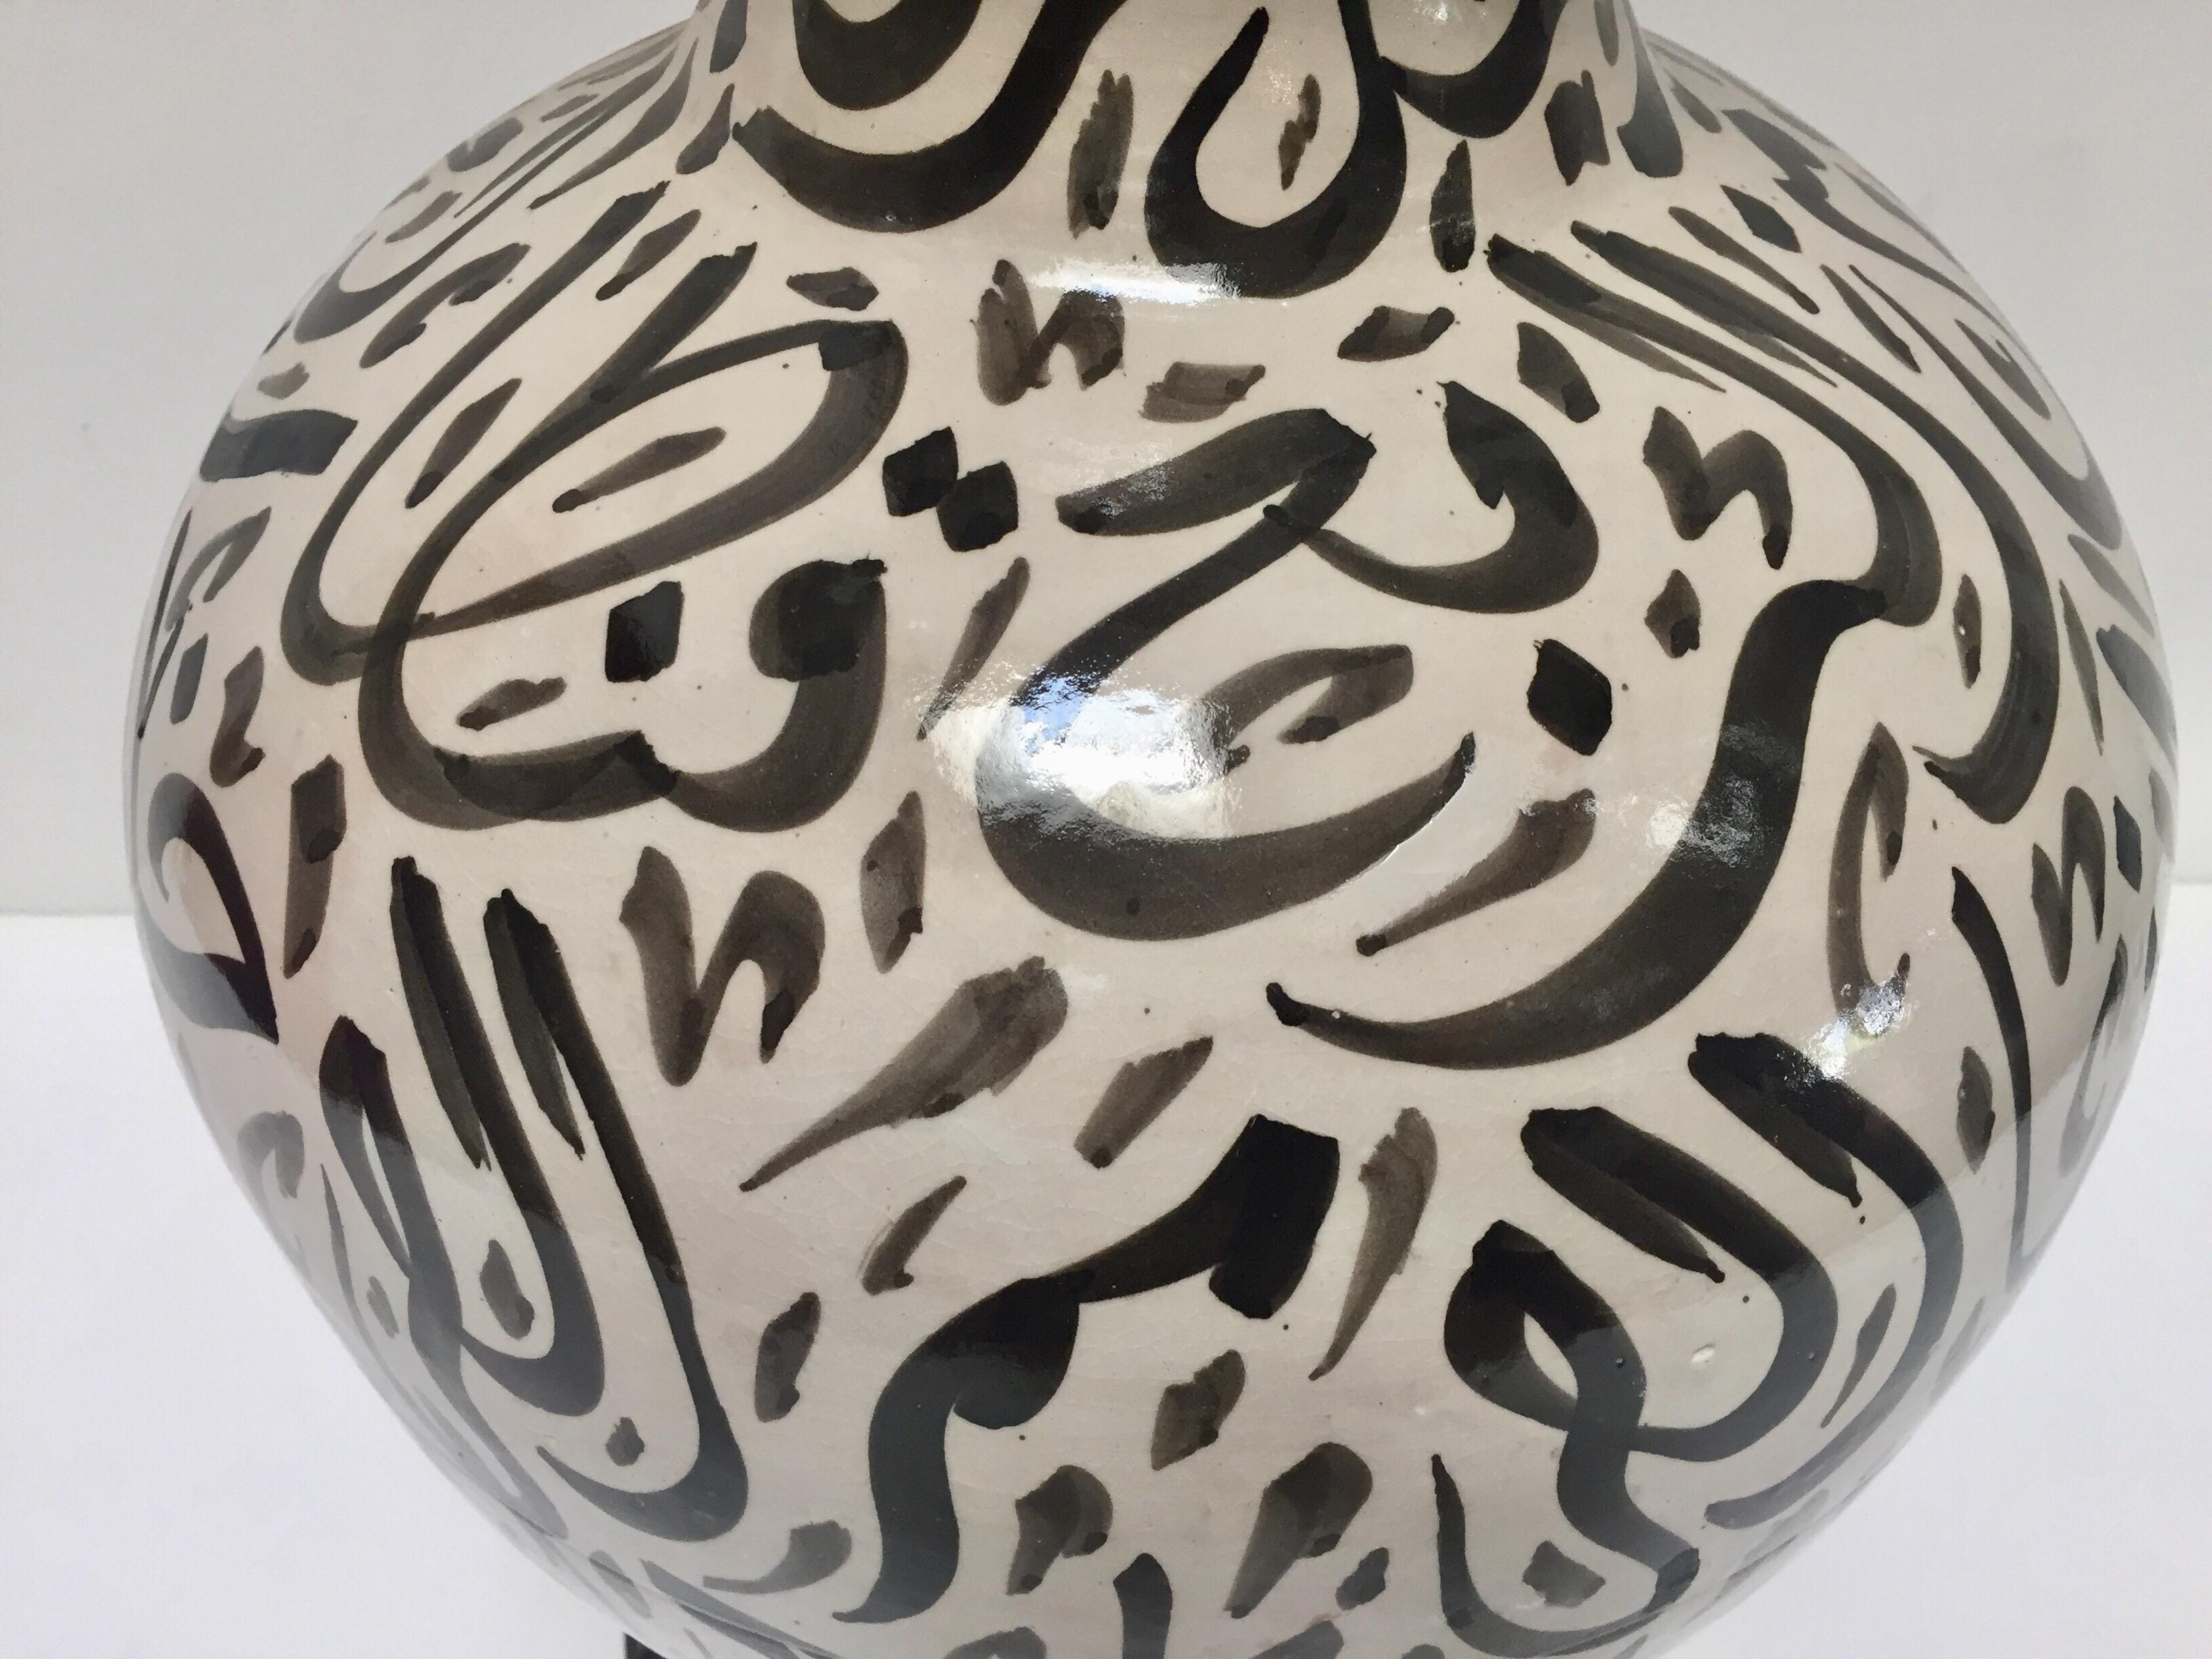 Large Moorish Glazed Ceramic Vase with Arabic Calligraphy Black Writing Fez In Good Condition For Sale In North Hollywood, CA